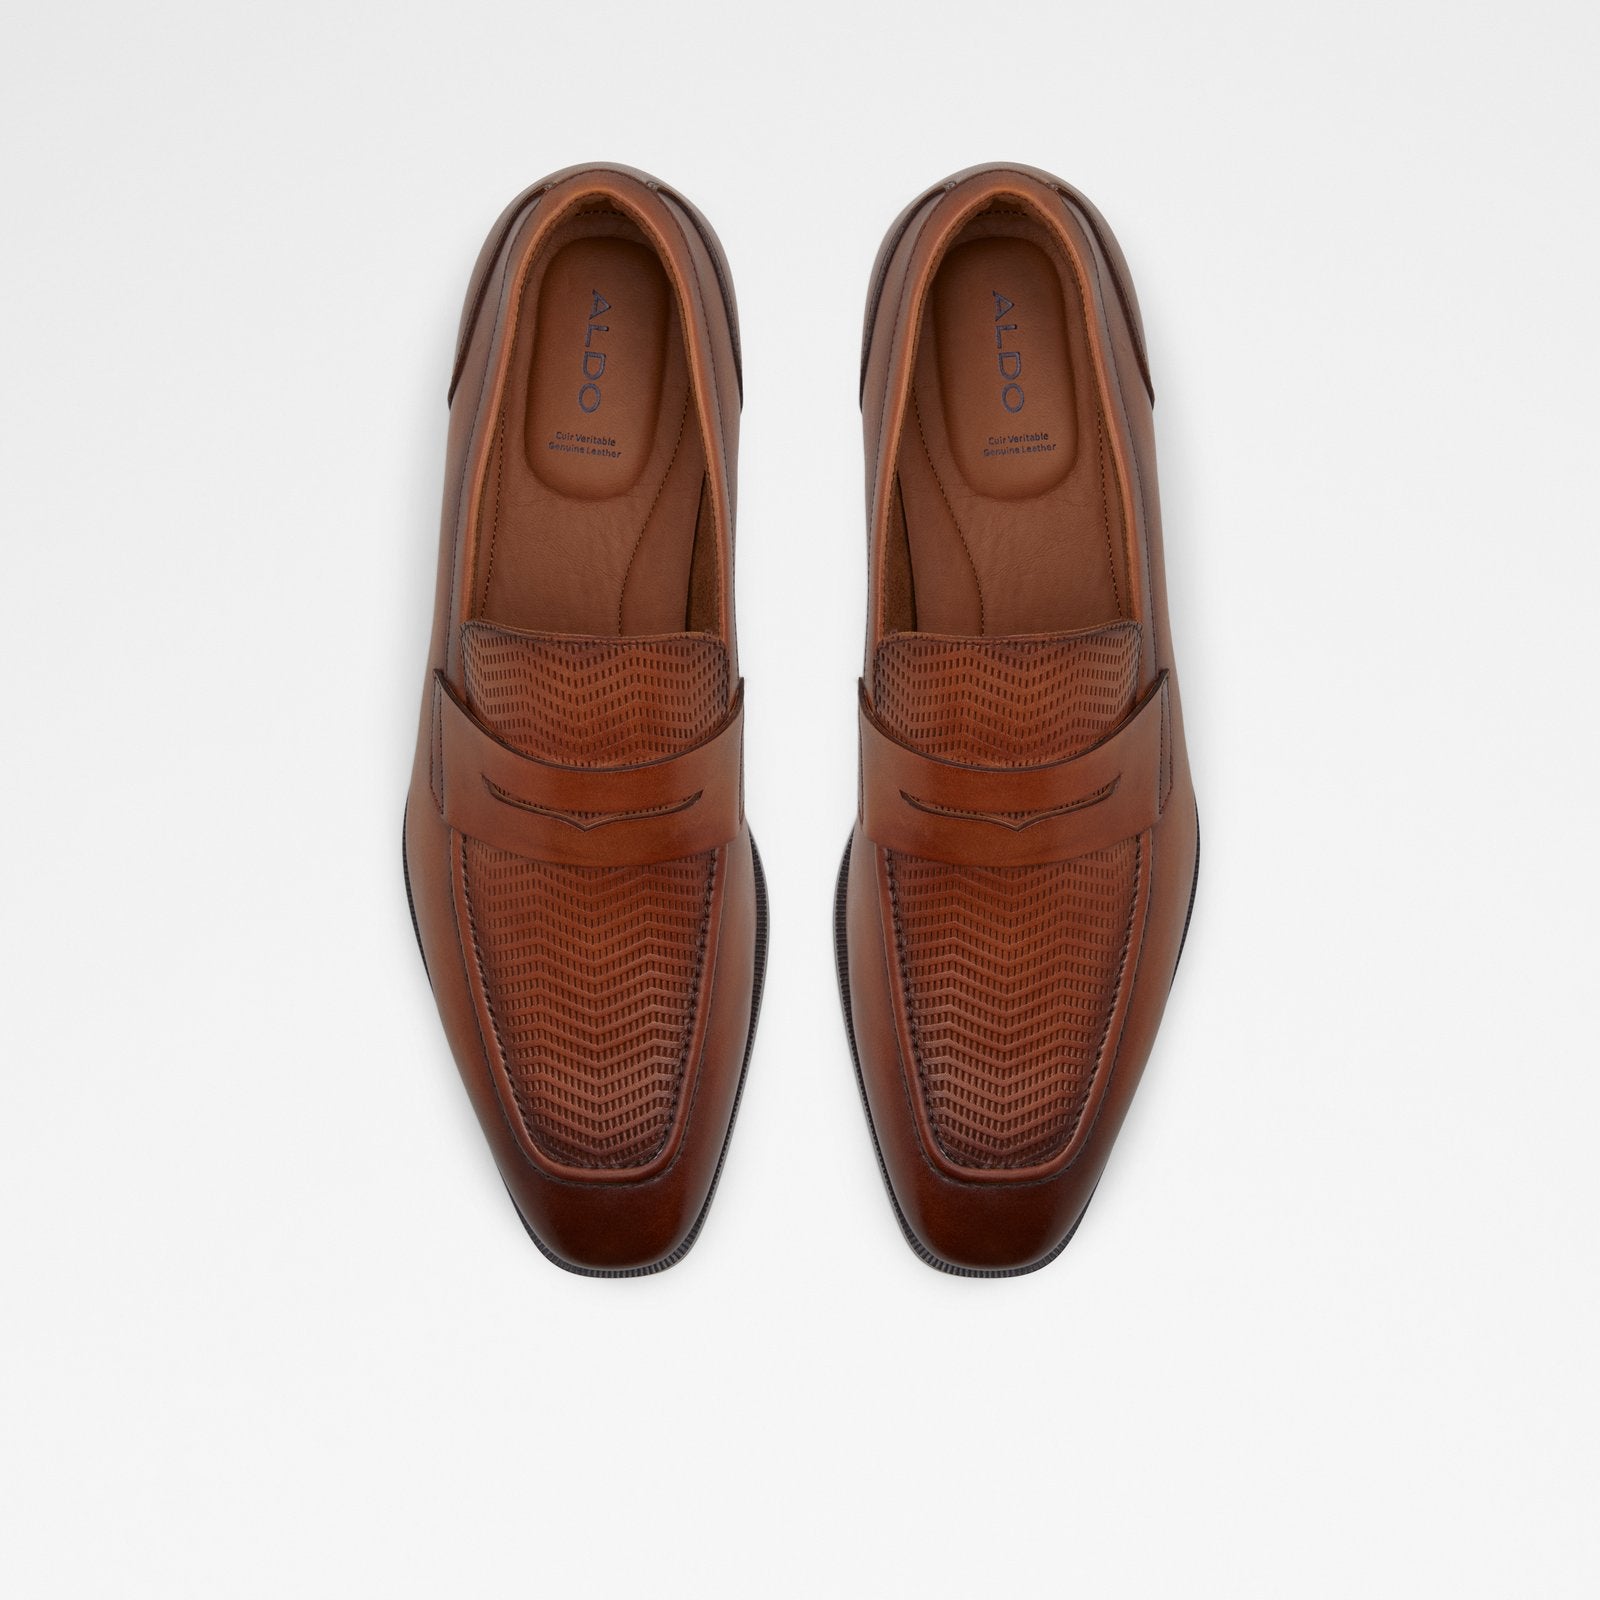 Aalto / Loafers